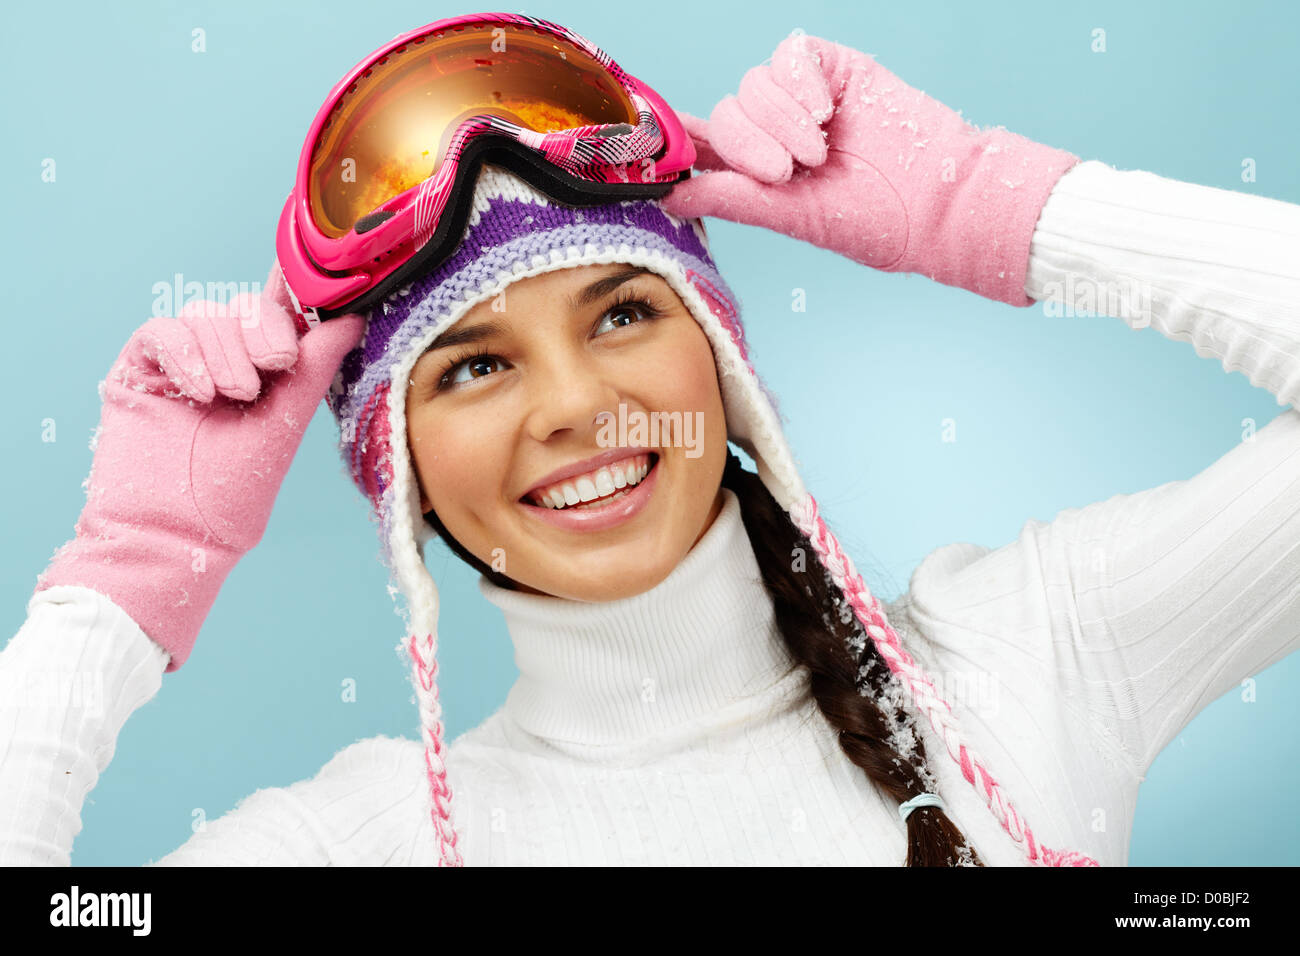 Pretty woman in goggles and knitted winter cap looking upwards with smile Stock Photo